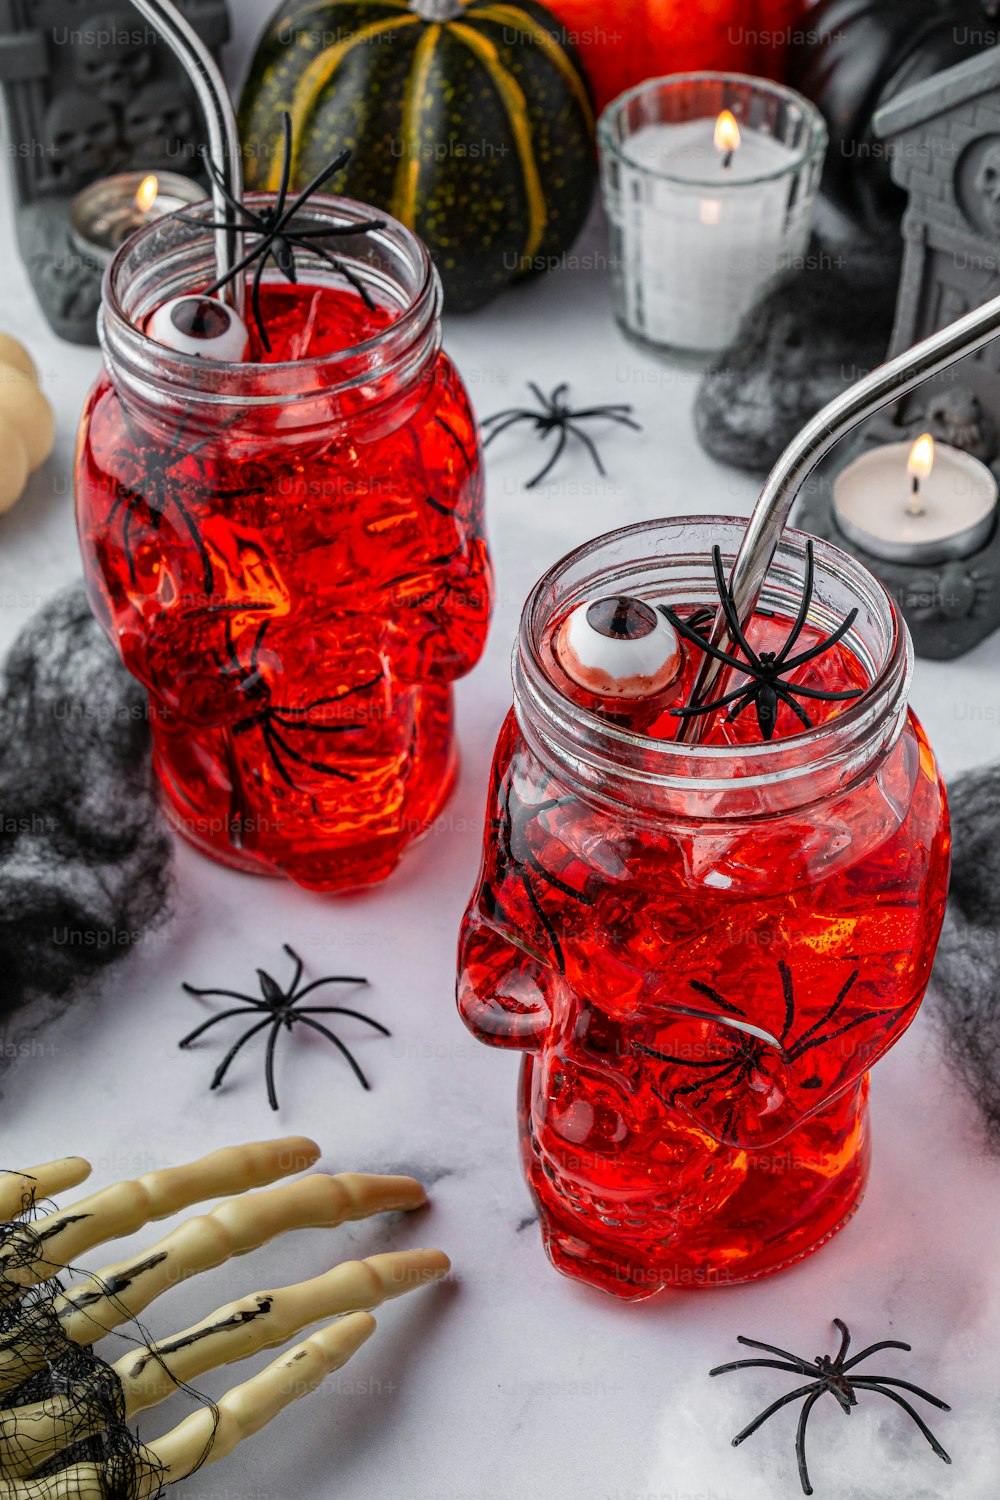 two mason jars filled with red liquid and spider webs